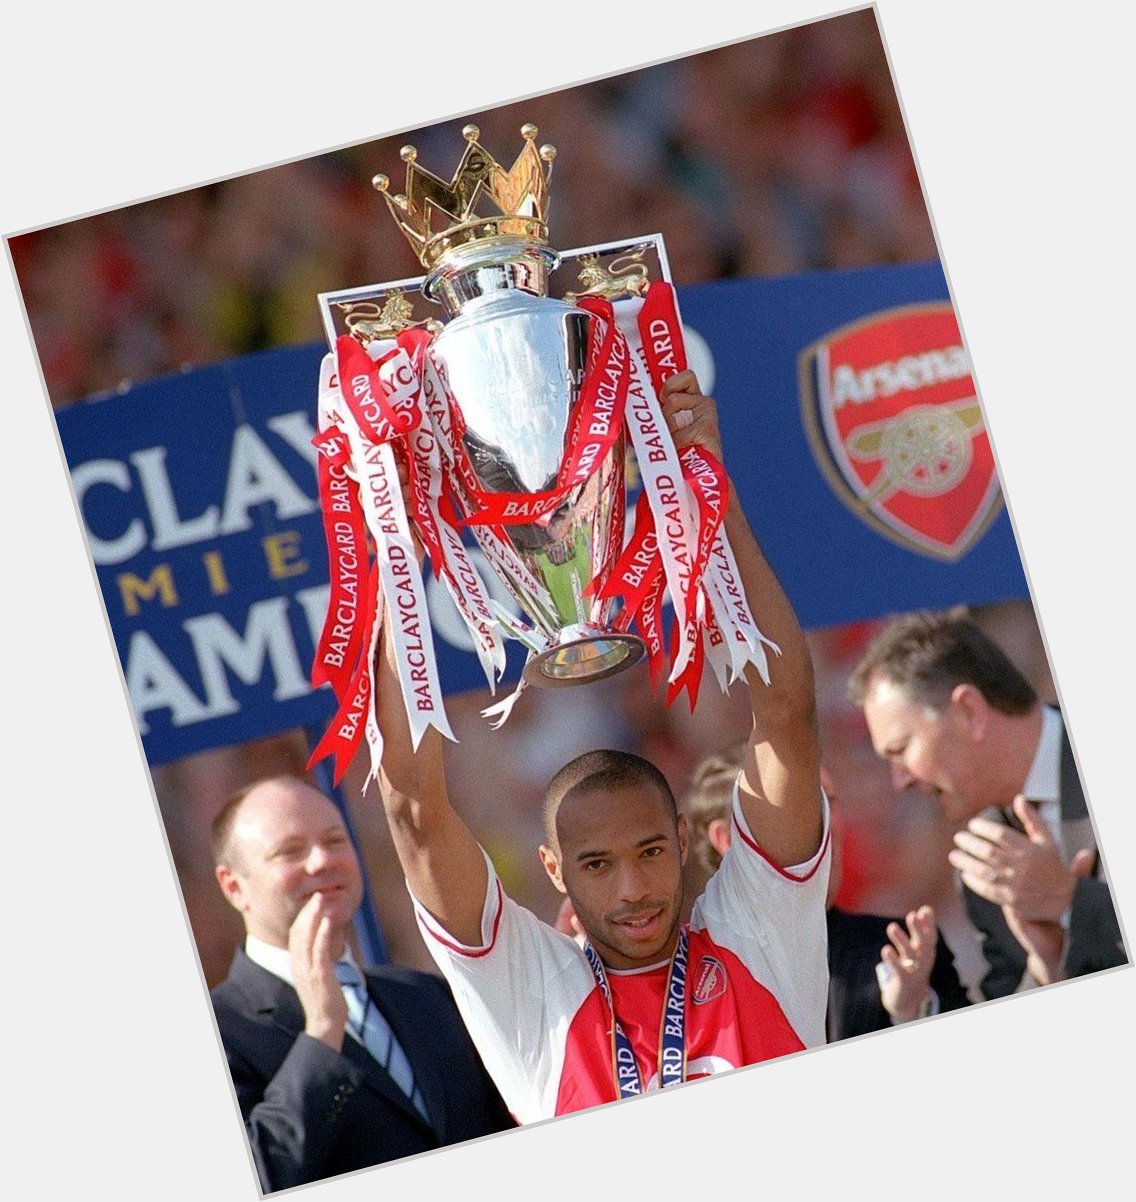 Happy birthday to the greatest player in Premier League history Thierry Henry 